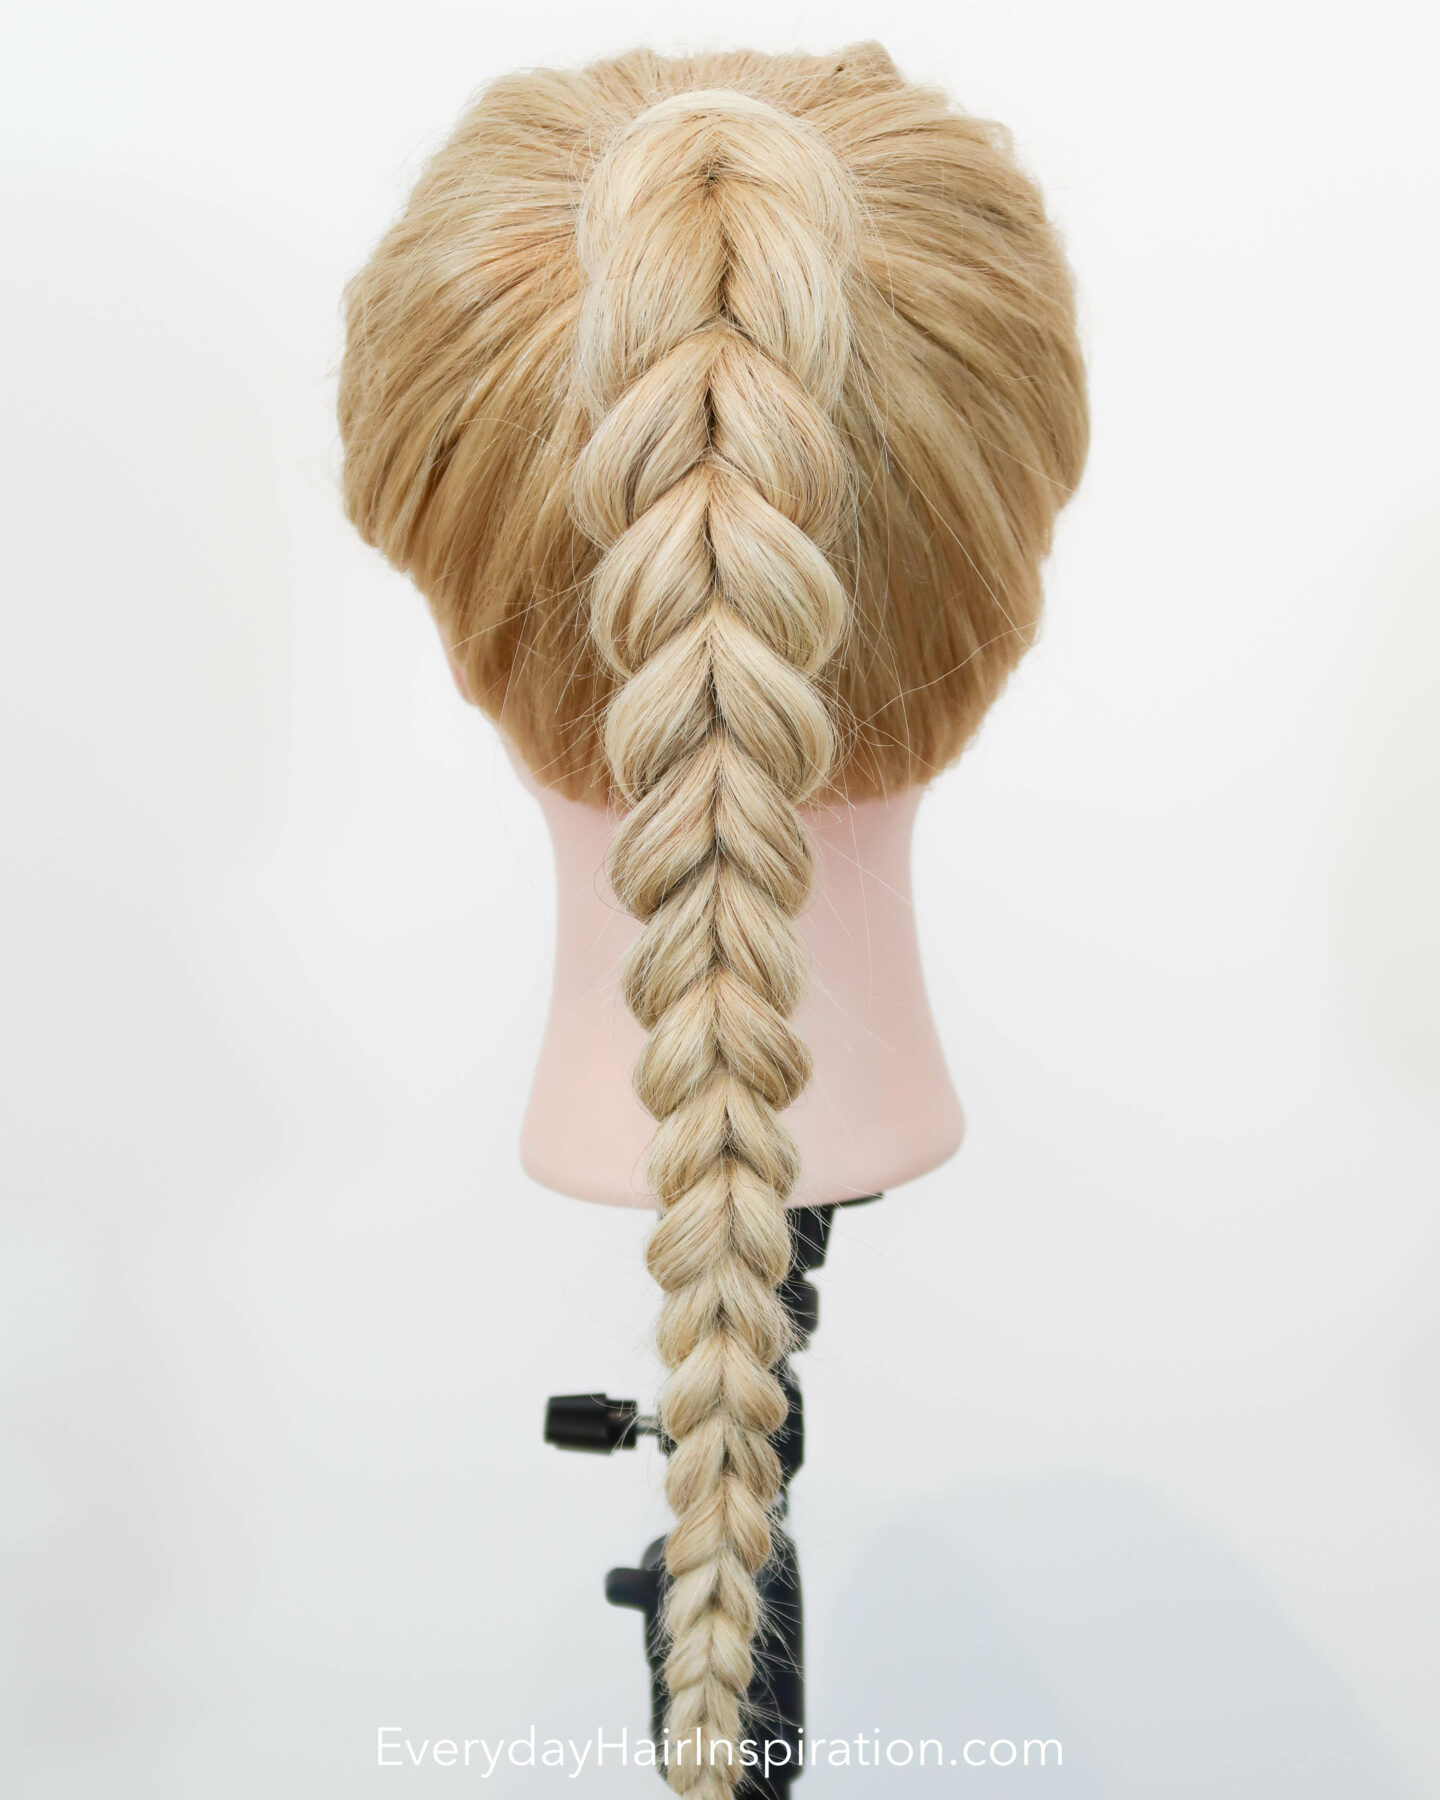 Blonde hairdresser doll seen from the back with a pull through braid in a high ponytail. 